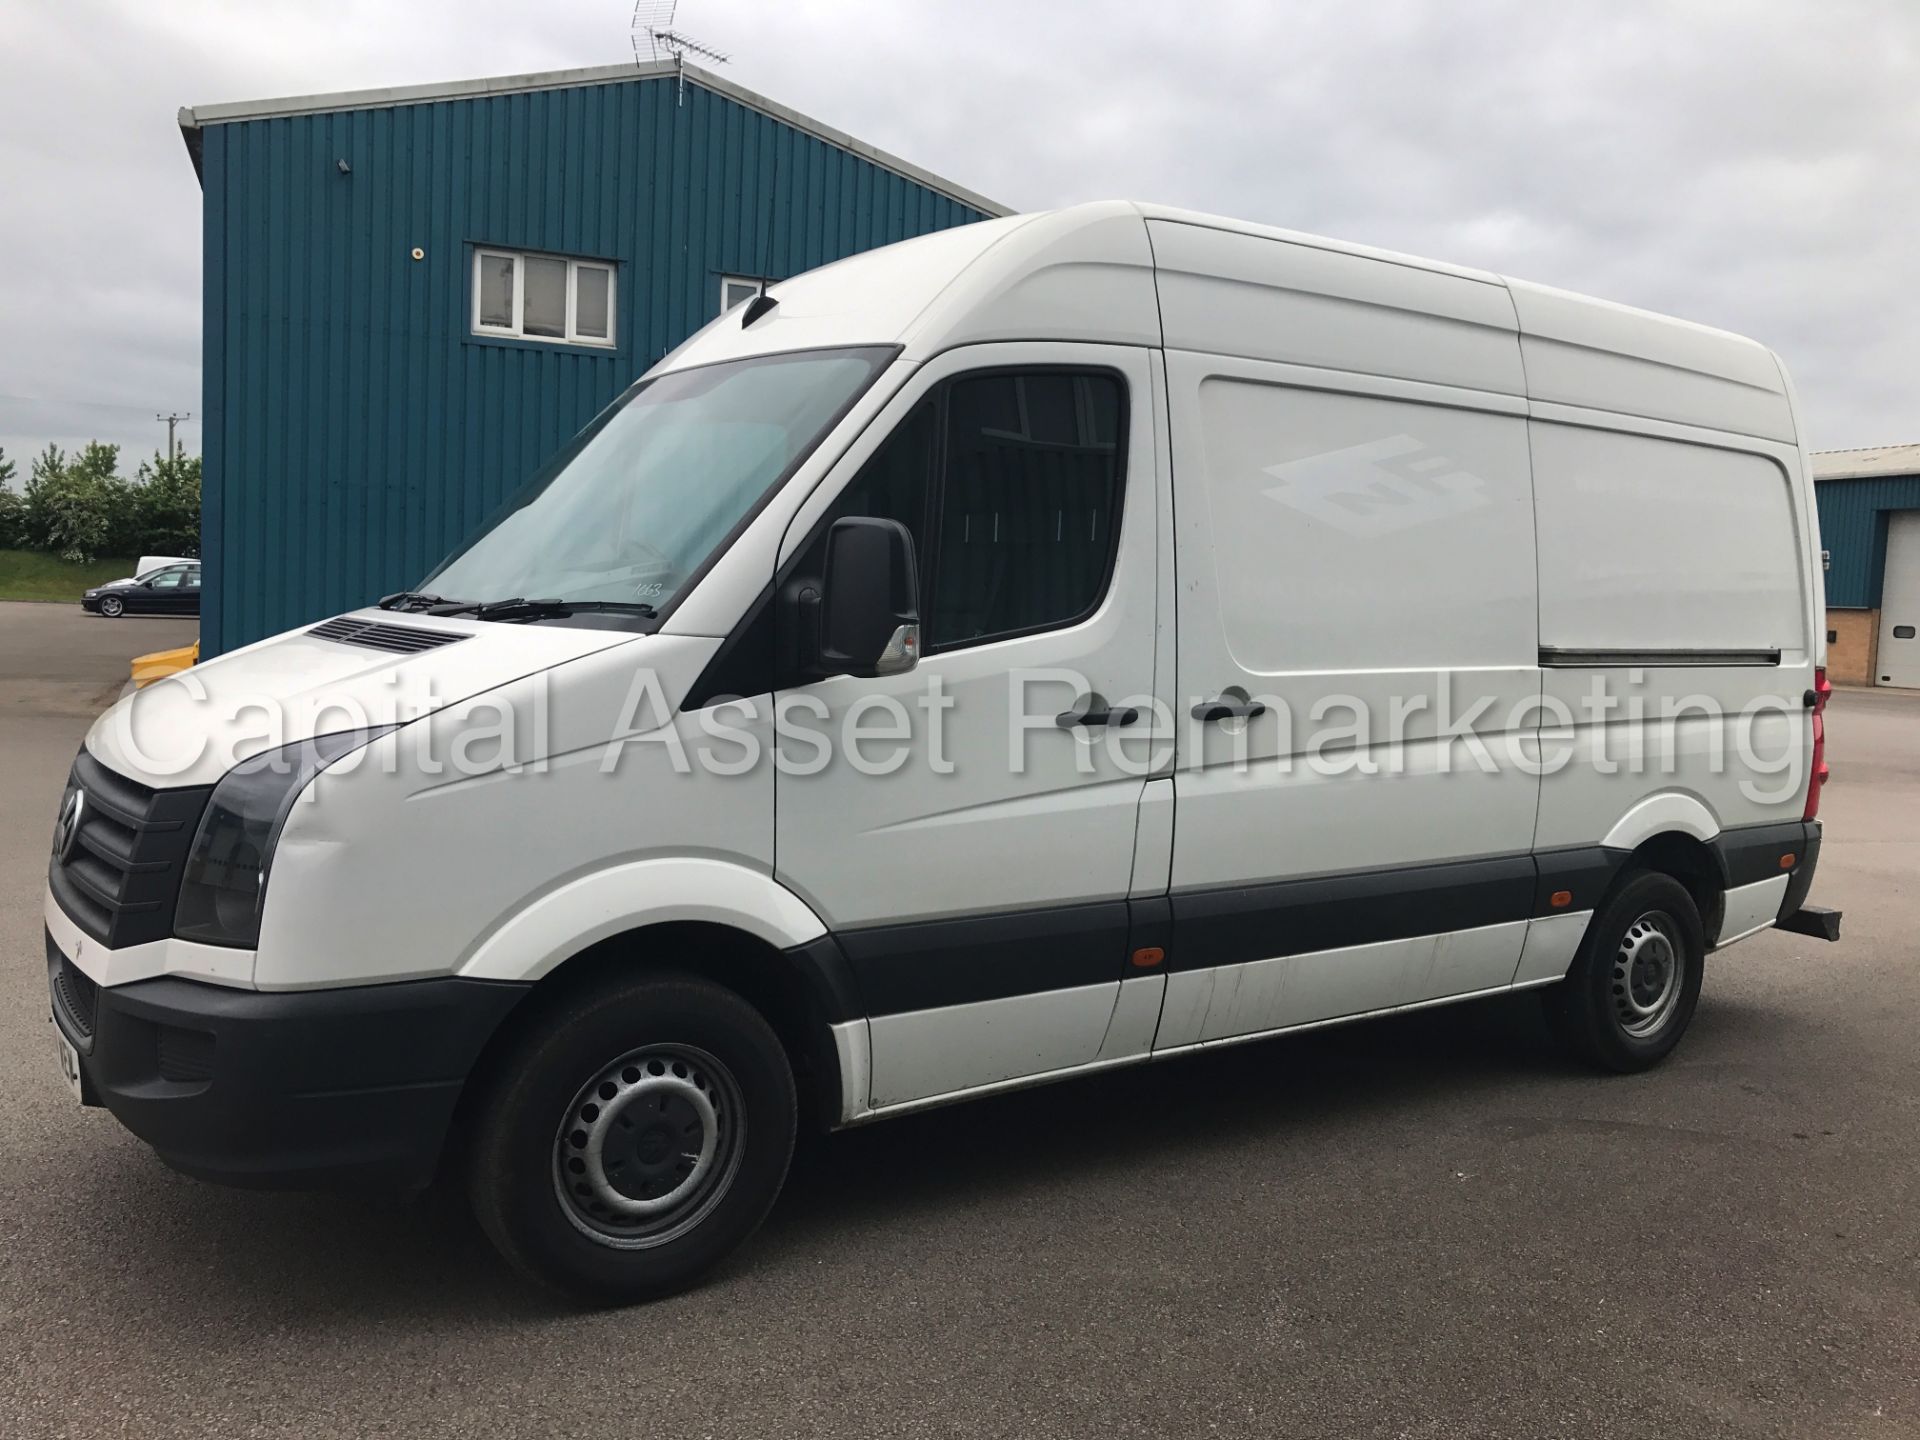 VOLKSWAGEN CRAFTER CR35 'MWB HI-ROOF' (2014) '2.0 TDI - 109 PS - 6 SPEED' *1 COMPANY OWNER FROM NEW* - Image 5 of 19